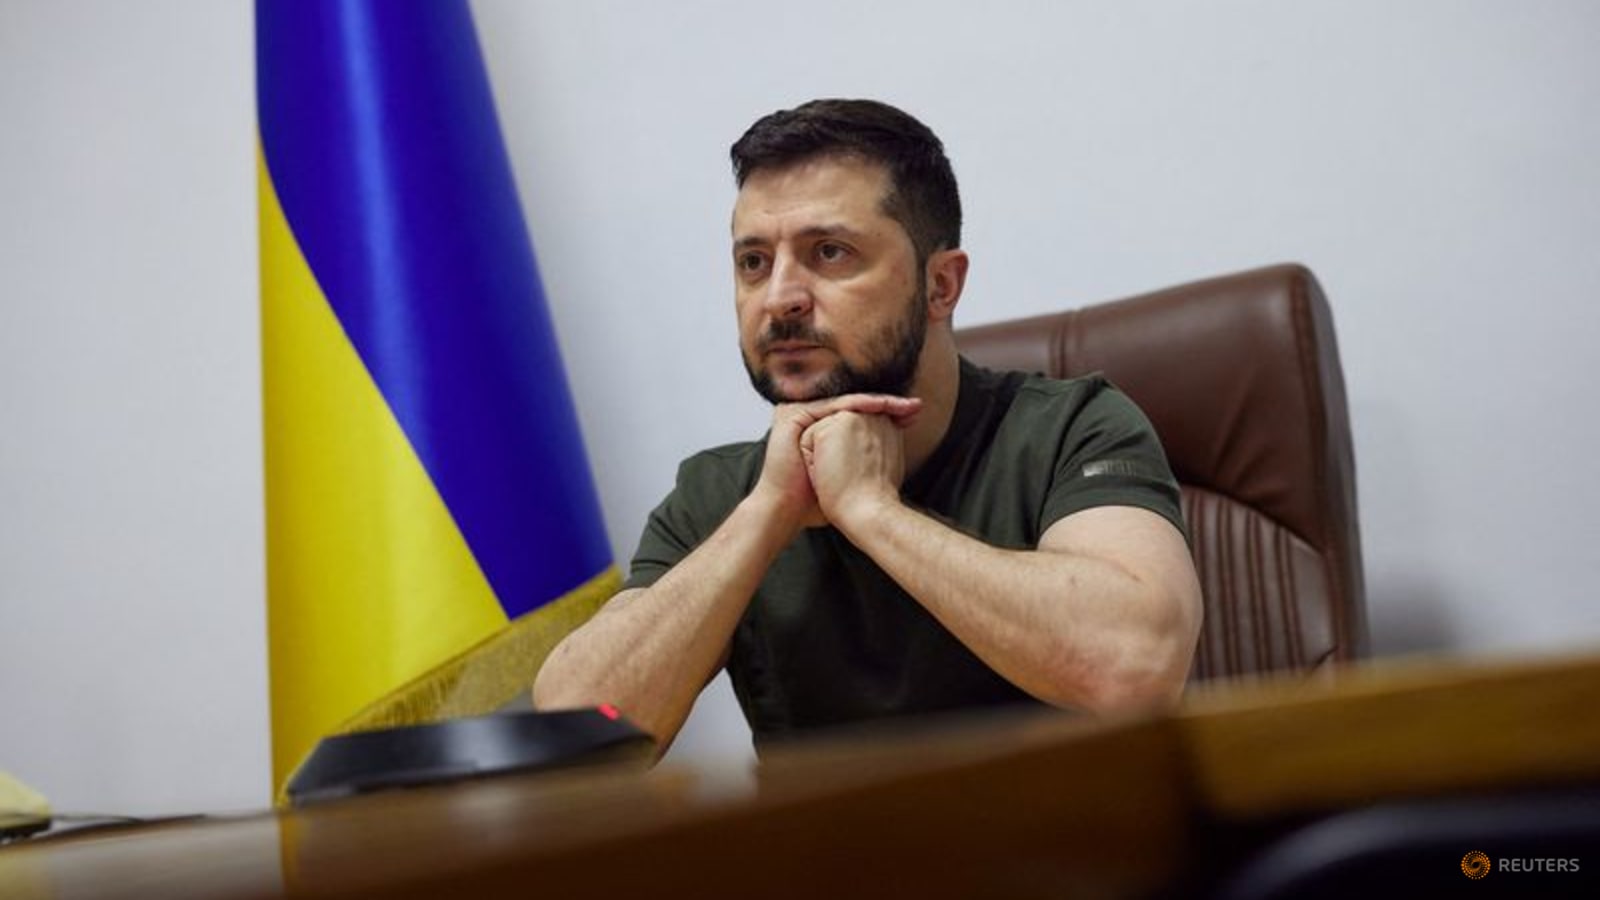 ukraine’s-zelenskyy-says-situation-in-some-places-tough,-fires-top-officials